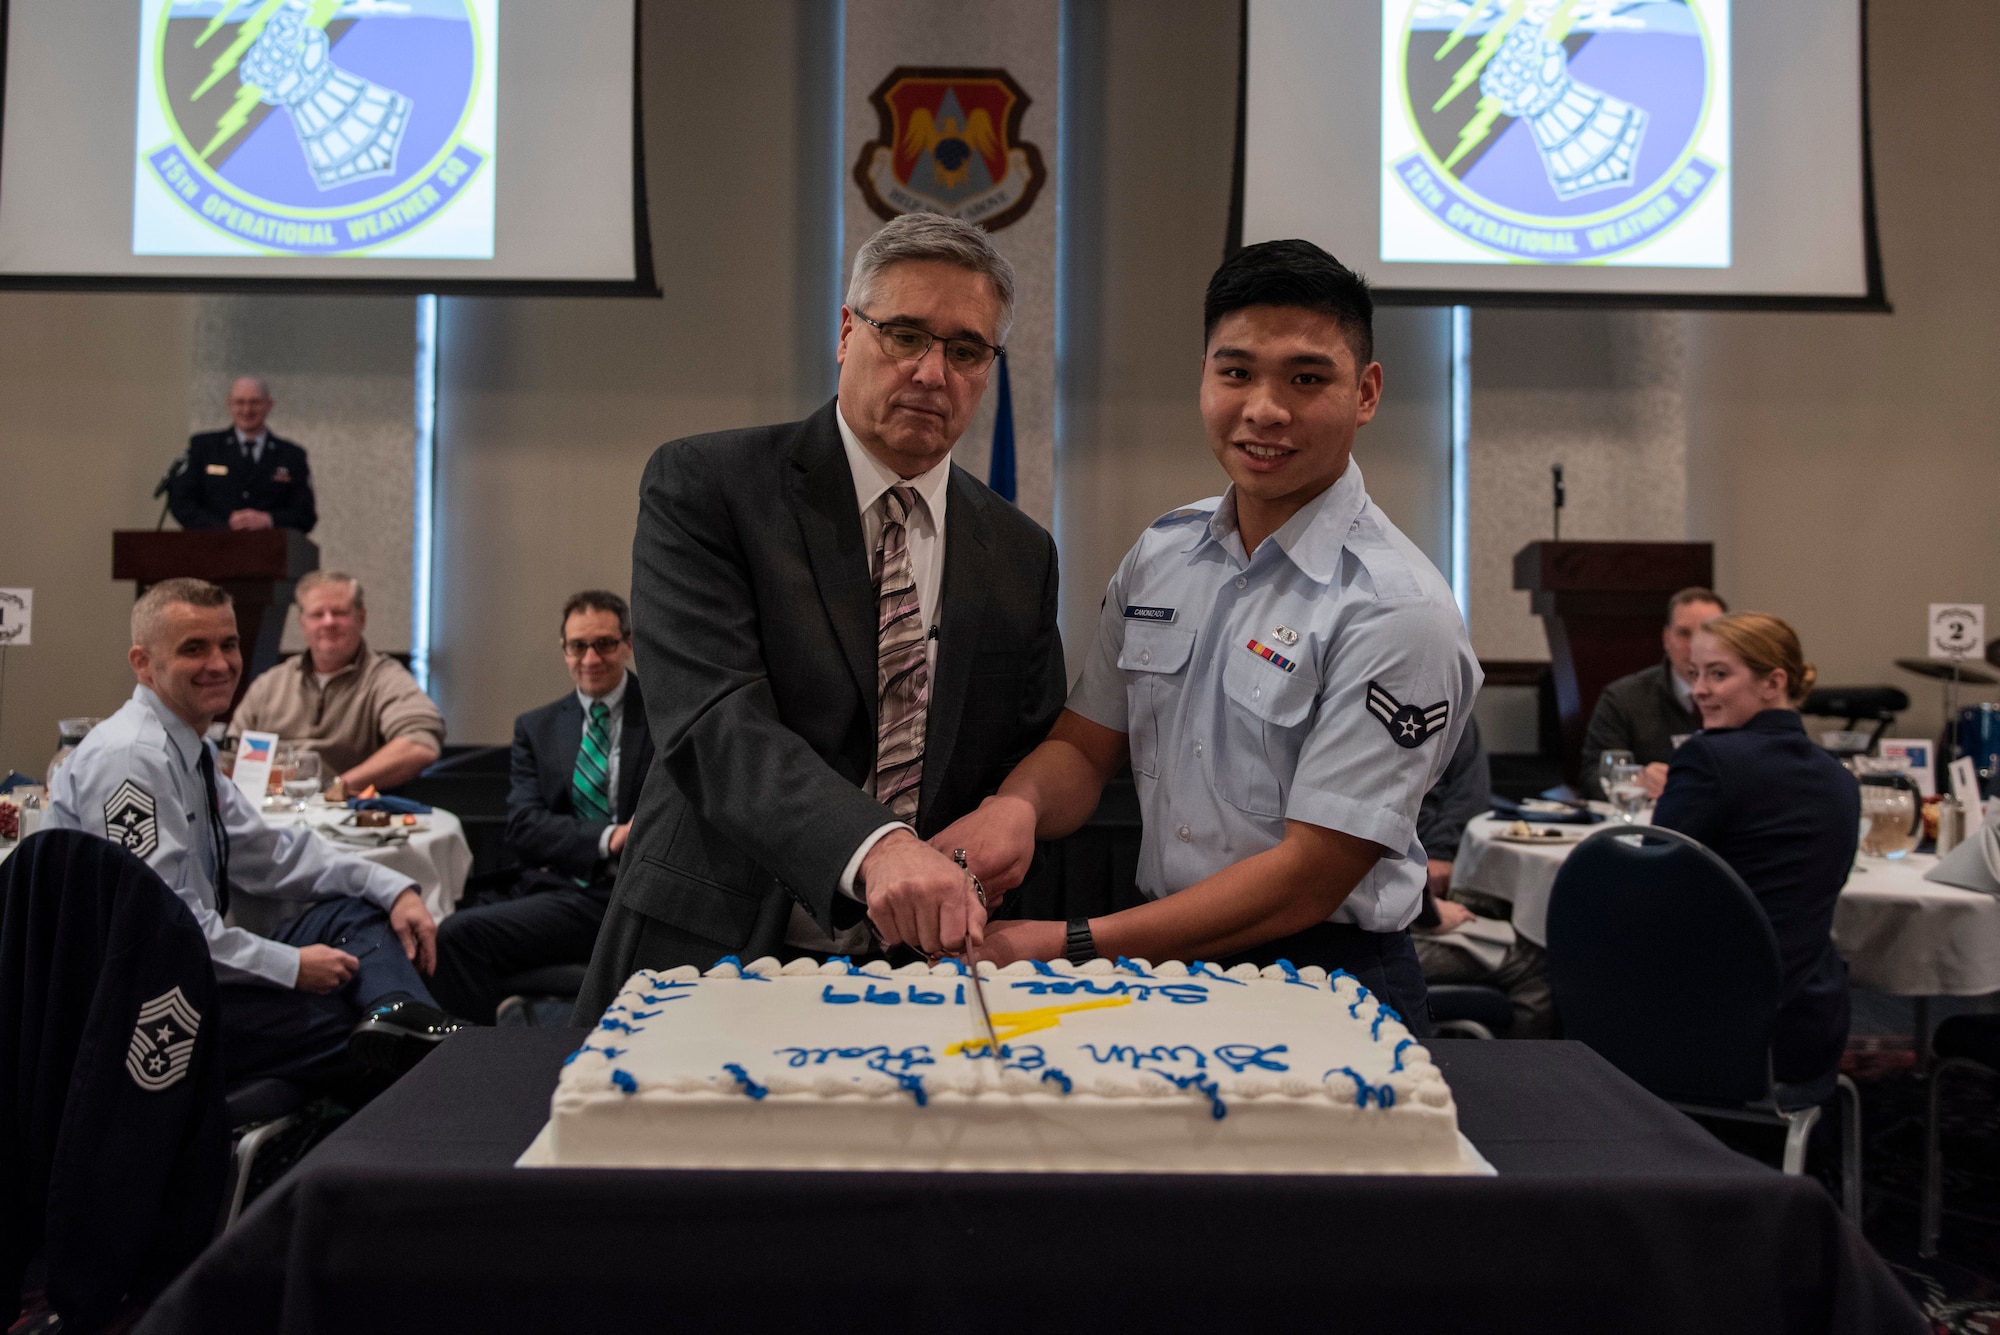 Frederick Wirsing, Air Mobility Command chief weather operations and plans branch, and U.S. Air Force Airman 1st Class Arjay Canonizado, 15th Operational Weather Squadron forecaster, cut the cake at the 15th OWS 20th anniversary dinner, Feb. 12, 2019, at Scott Air Force Base, Ill. During its 77 years, the 15th OWS has been located in six states and four countries across three different continents. It has spent the last 20 years assigned to Scott. (U.S. Air Force photo by Senior Airman Daniel Garcia)